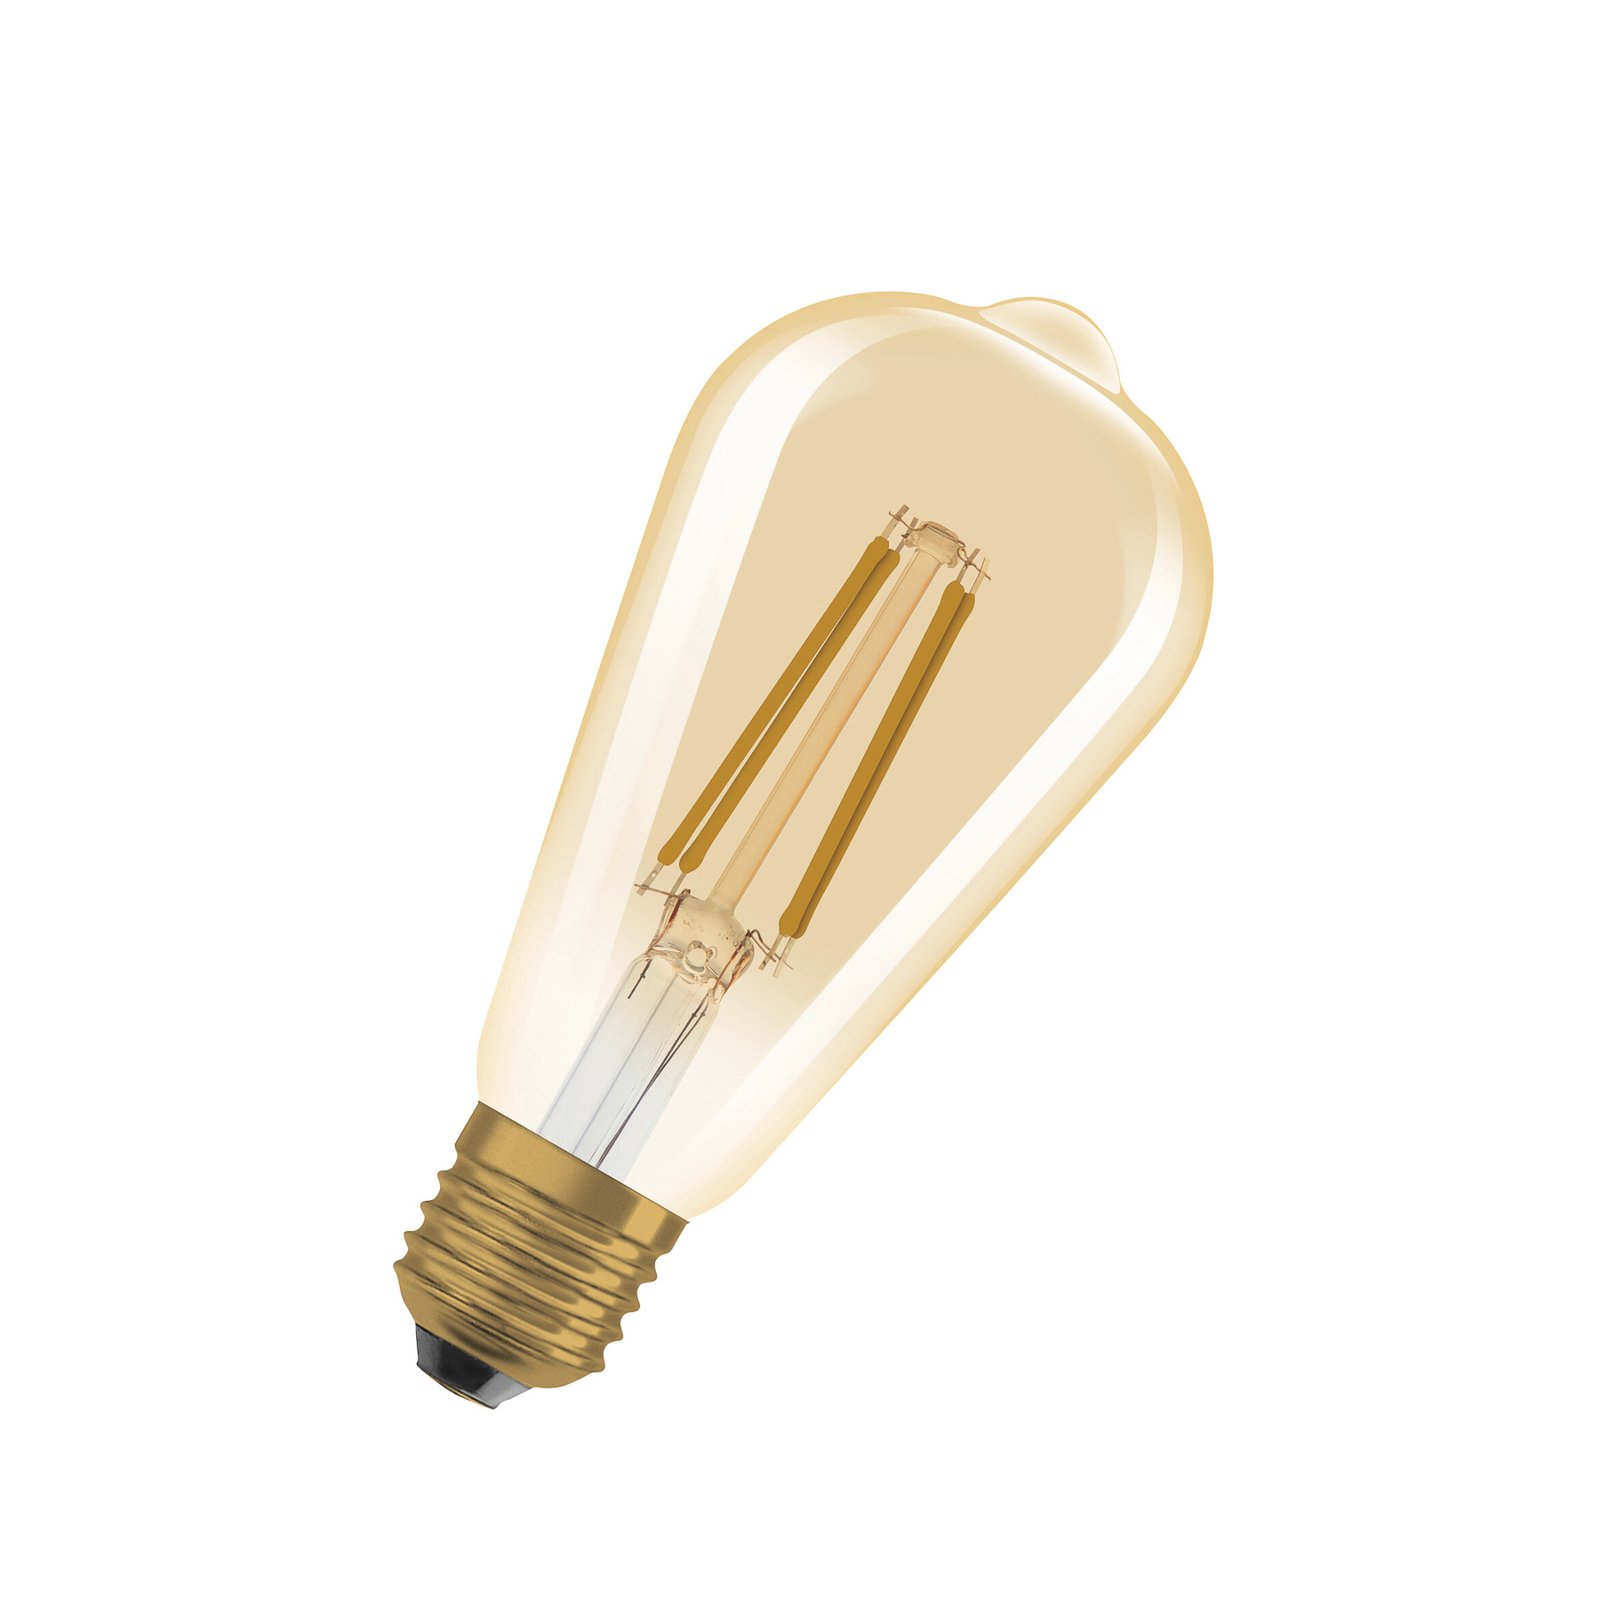 OSRAM LED Vintage 1906 Edison, gold, E27, 7.2 W, 824, dimmable.